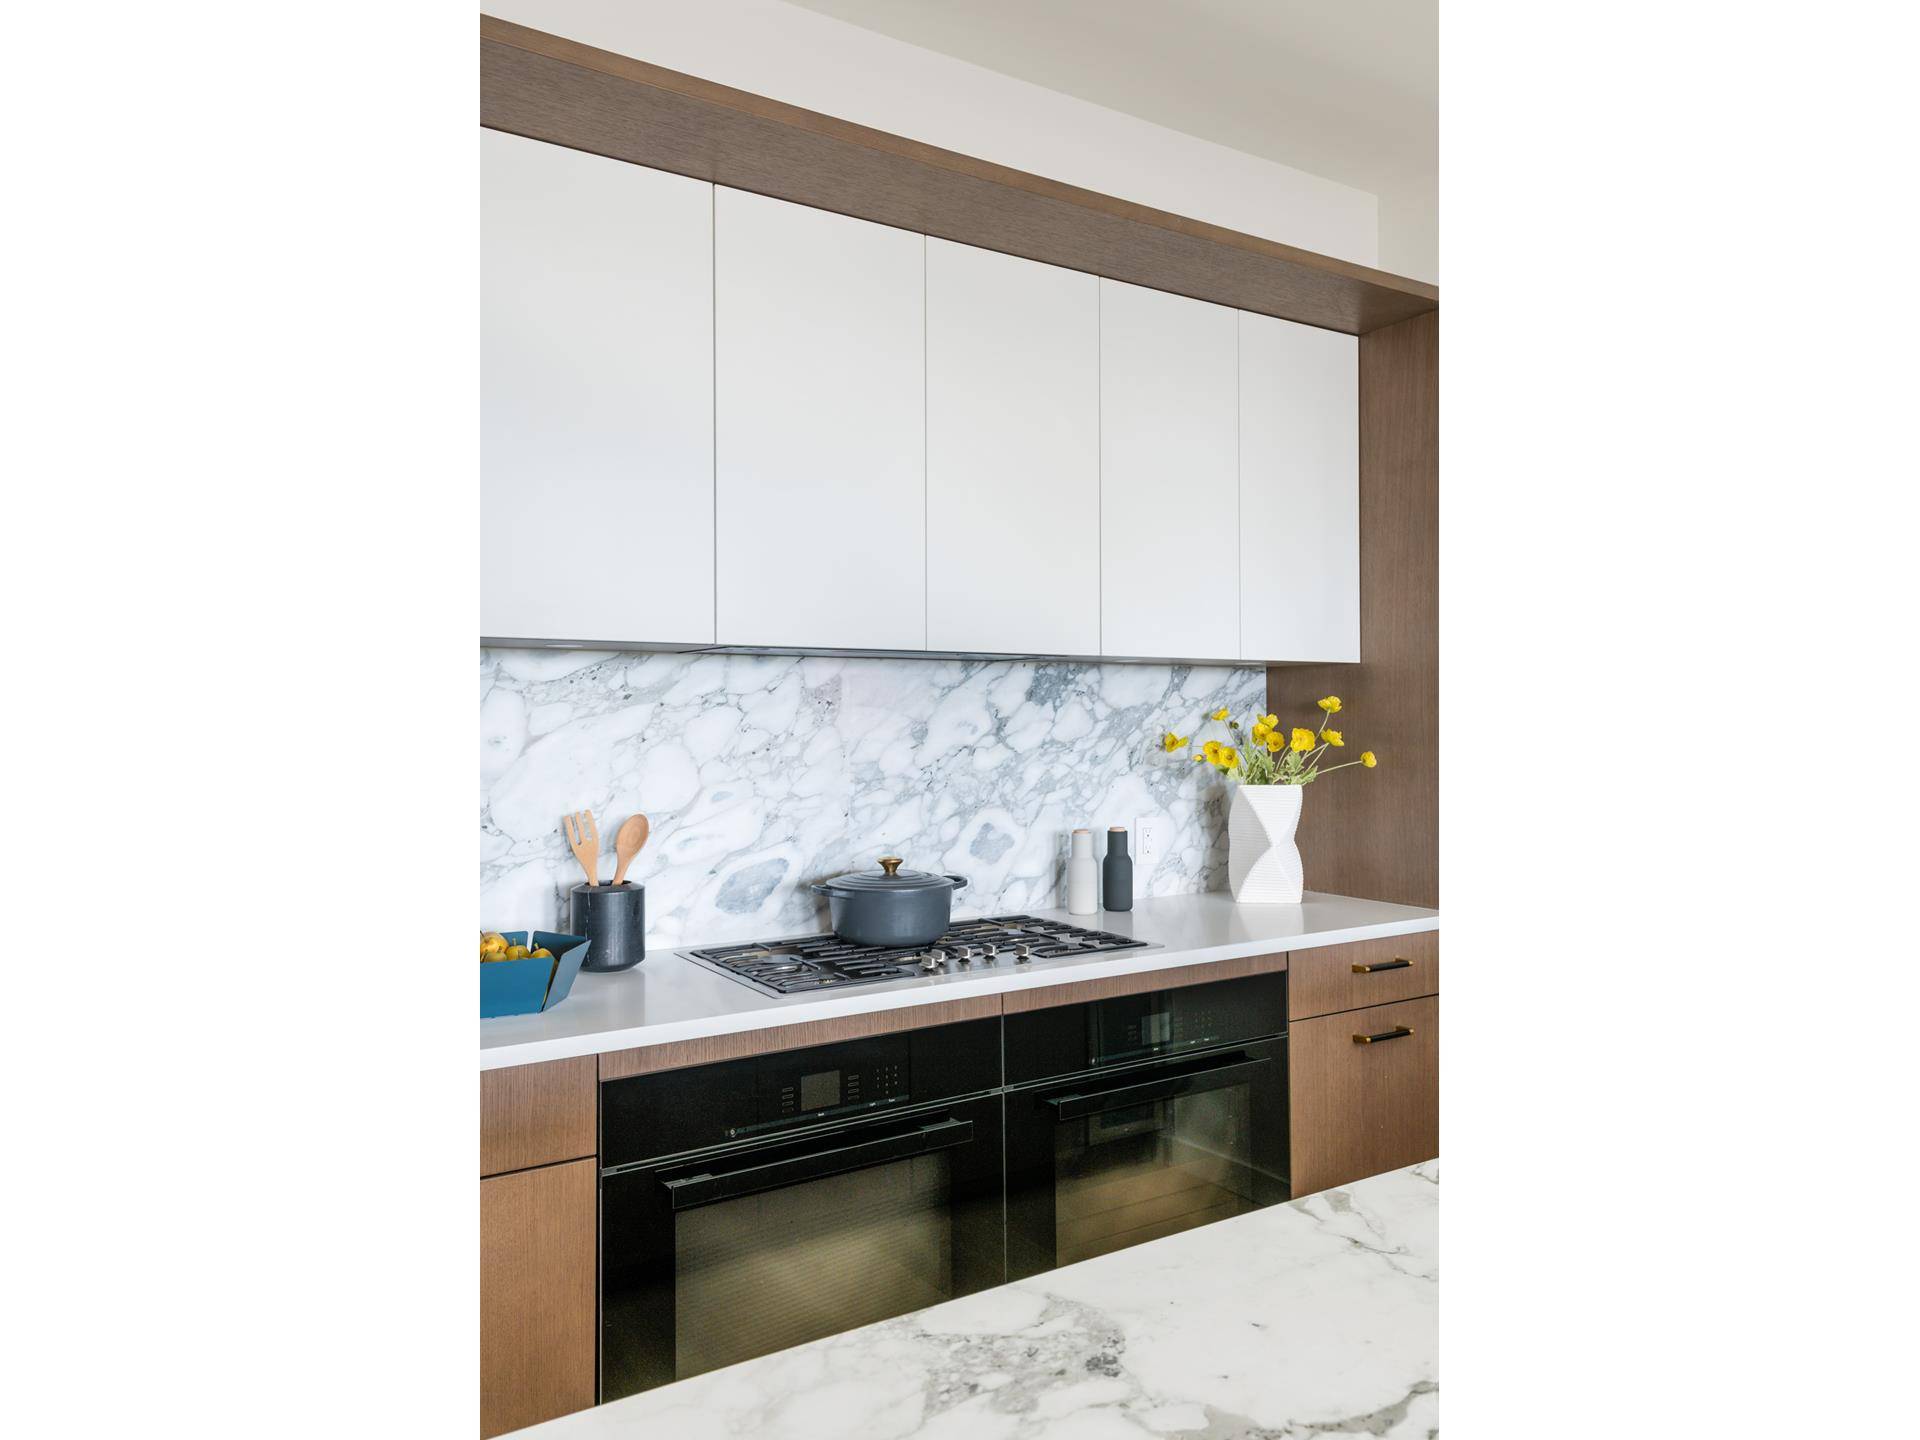 Artfully designed Residence 4B at the stunning new boutique Parlour condominium exudes a blend of classicism and modern refinement in a coveted Brooklyn neighborhood This gorgeous 3 bedroom, 2.